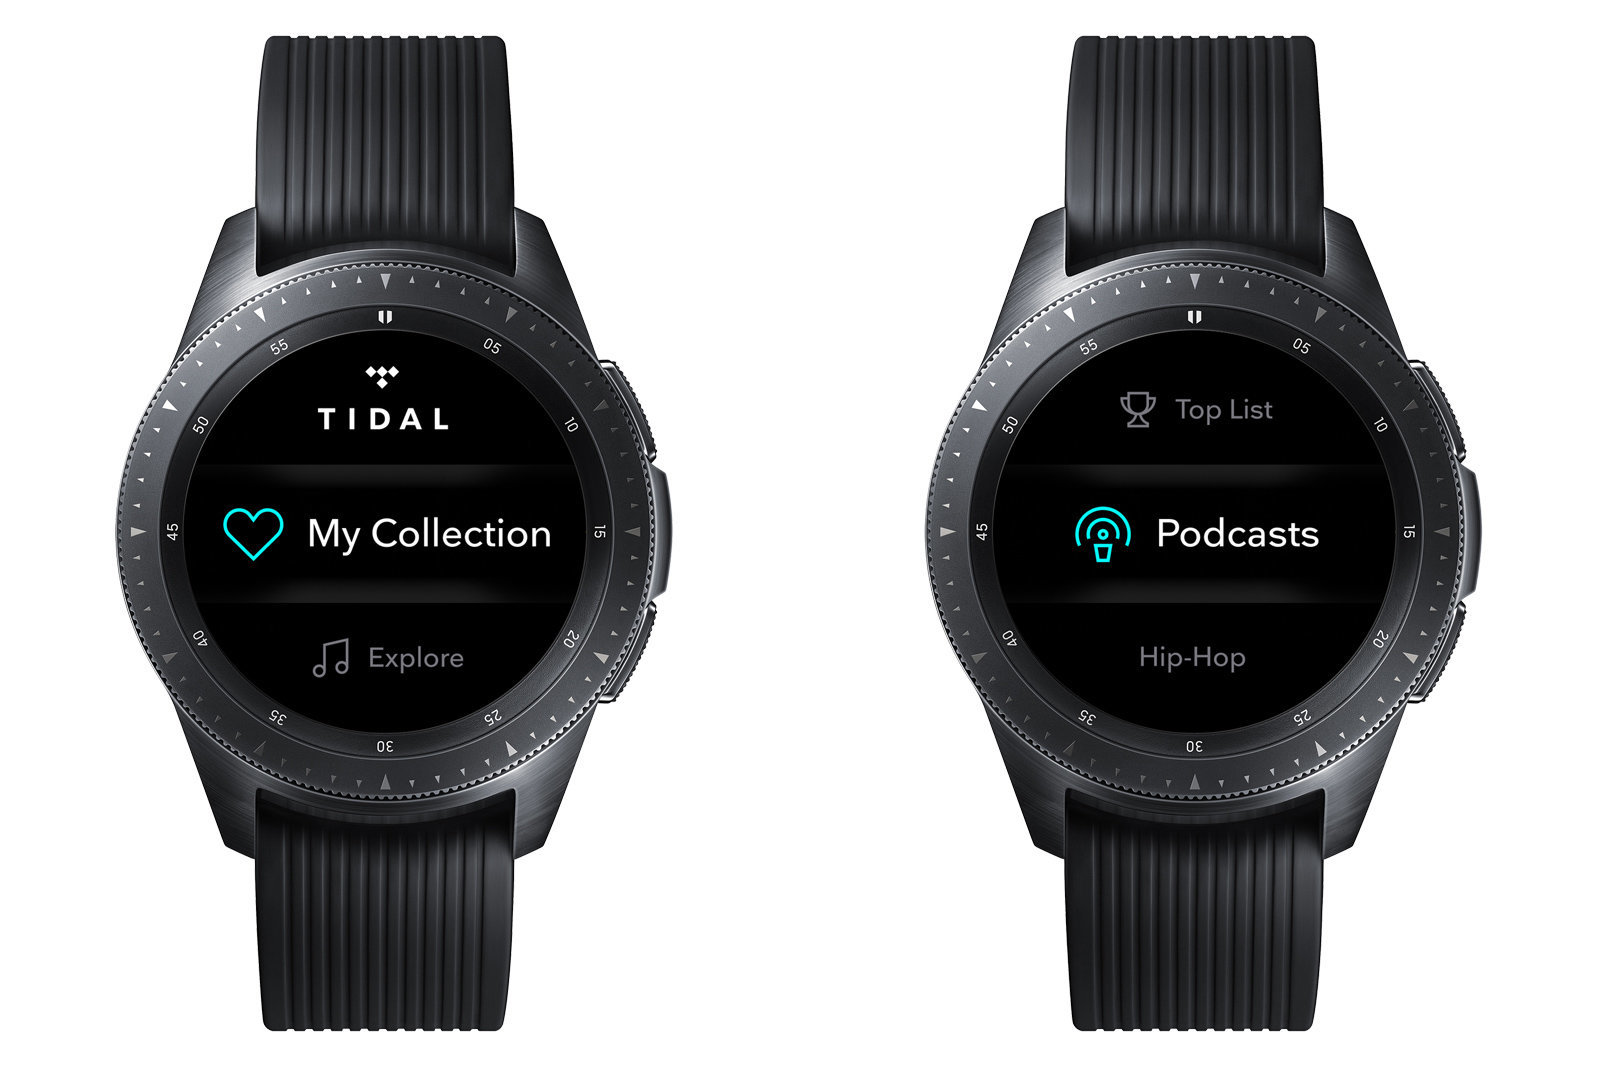 How to Add Tidal Music to Wear OS Smartwatches